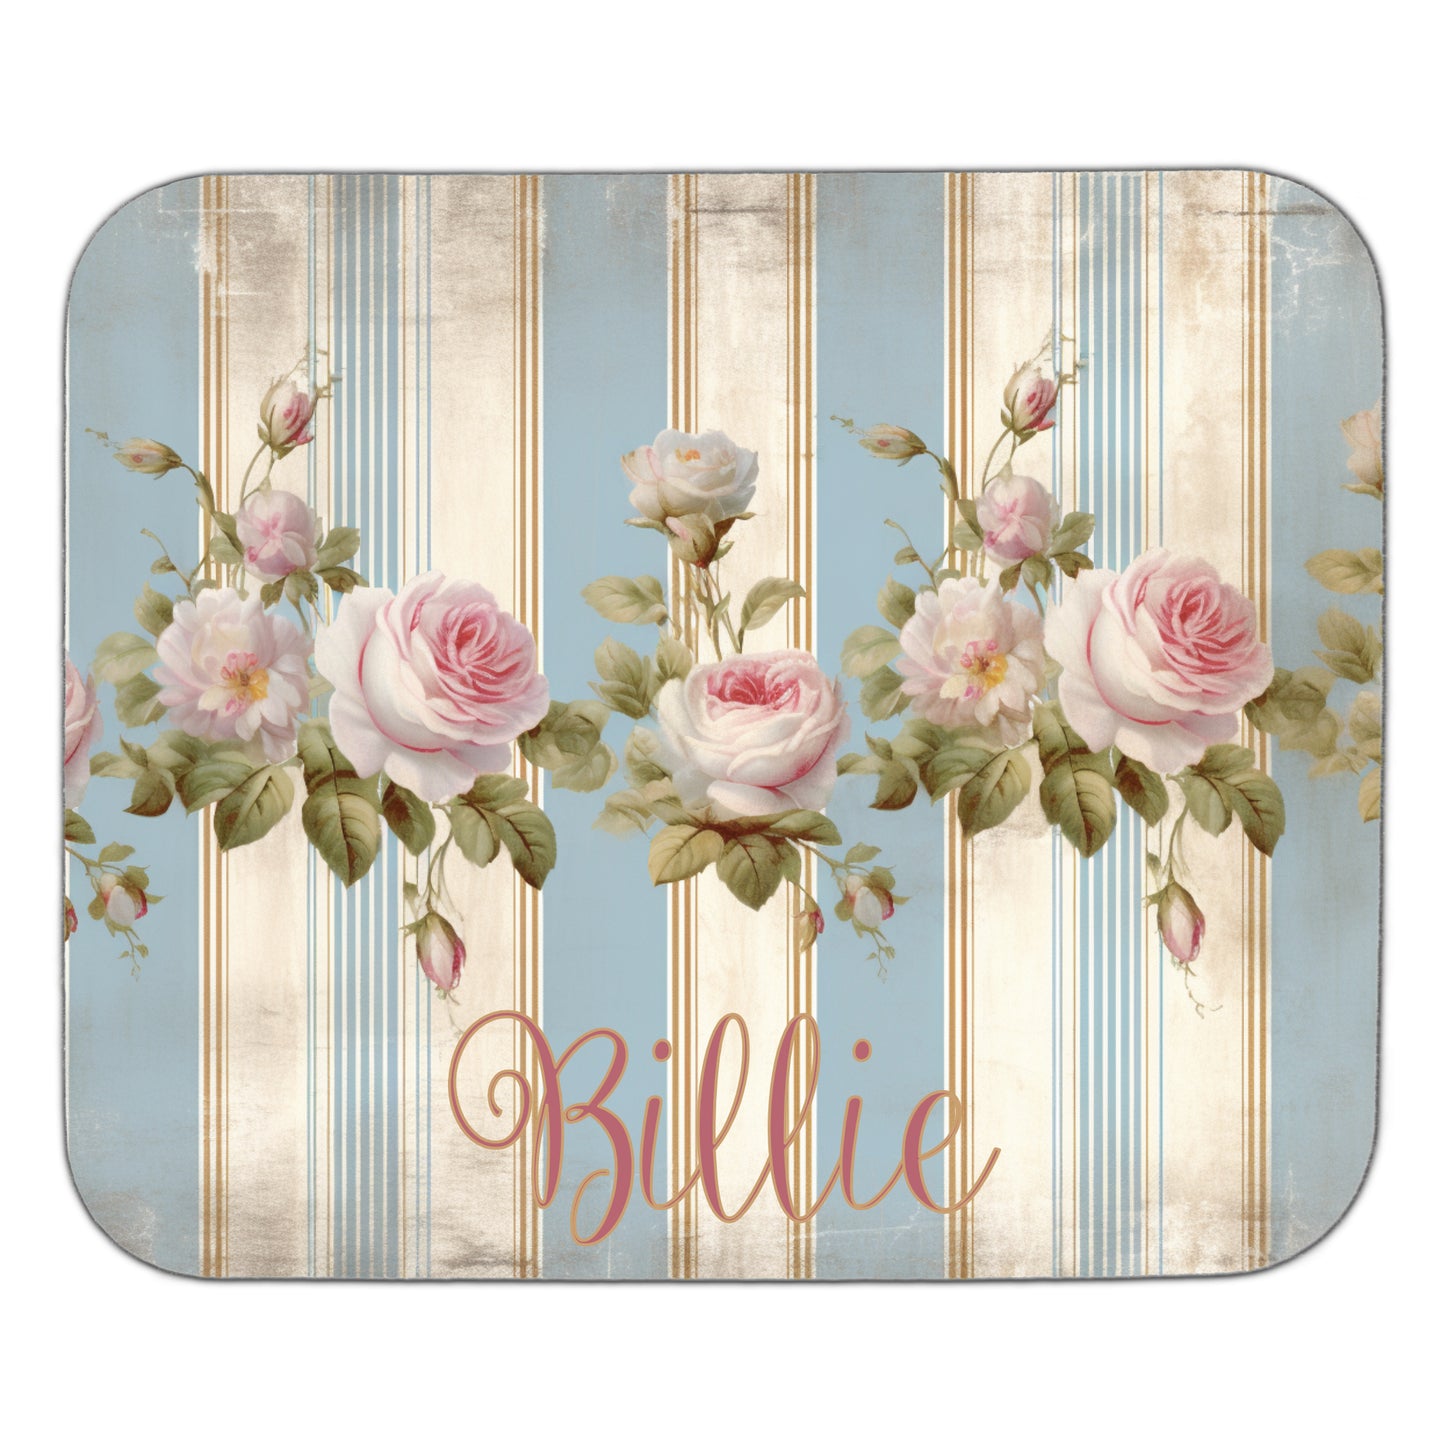 Cute Mouse Pad, Shabby Chic, Rose, Personalized Name, Custom, Laptop, Computer Accessories, Desk Pad